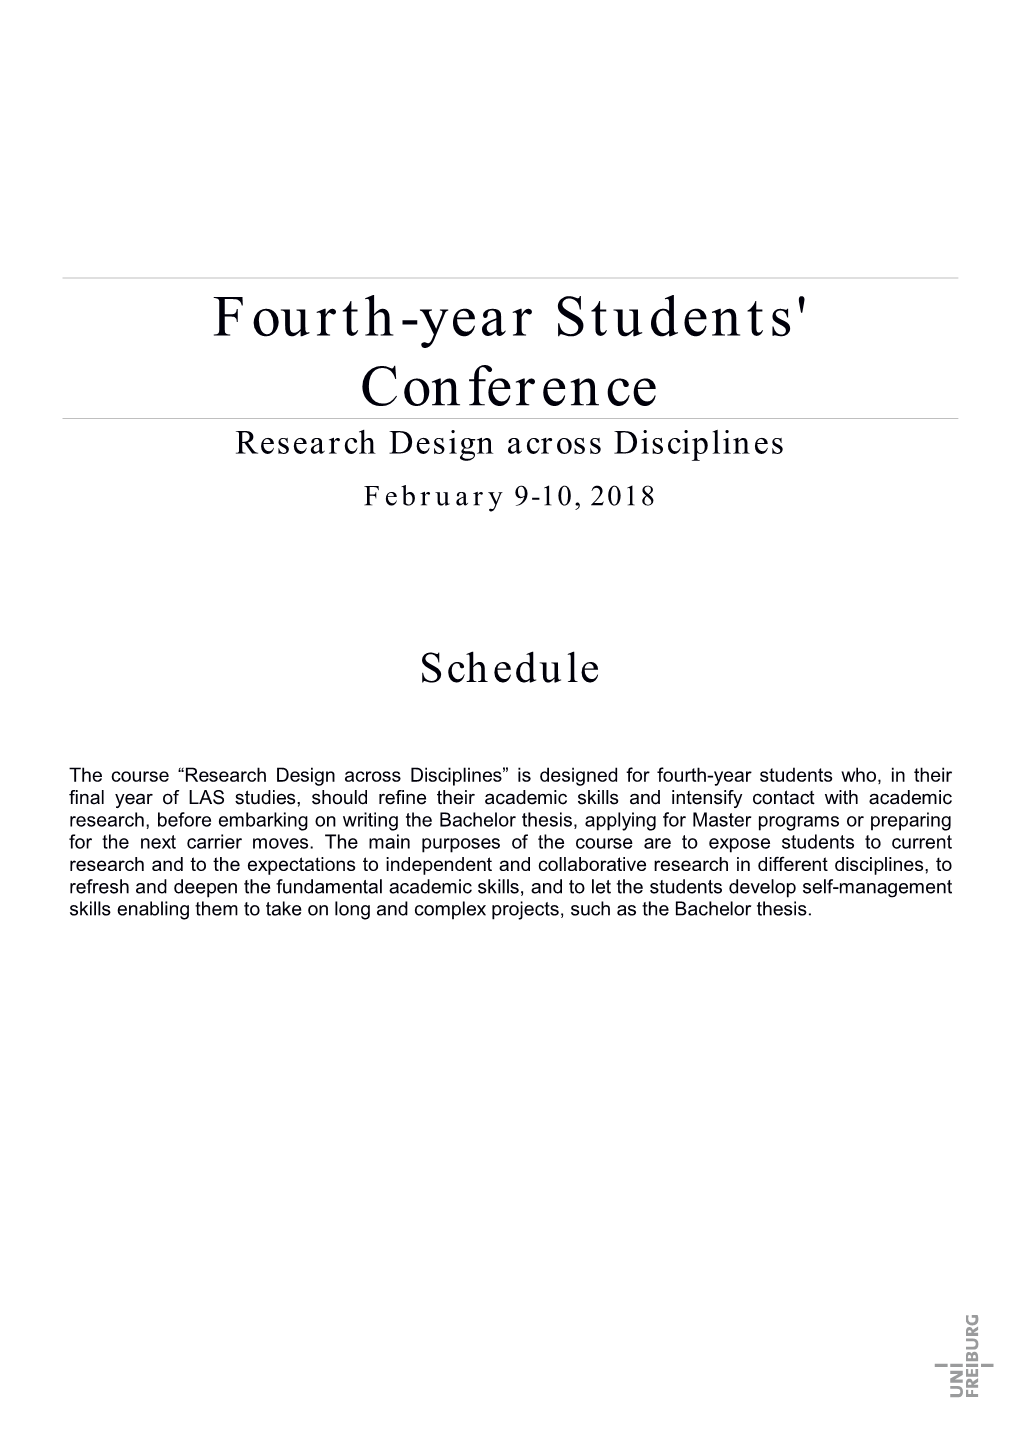 Fourth-Year Students' Conference Research Design Across Disciplines February 9-10, 2018